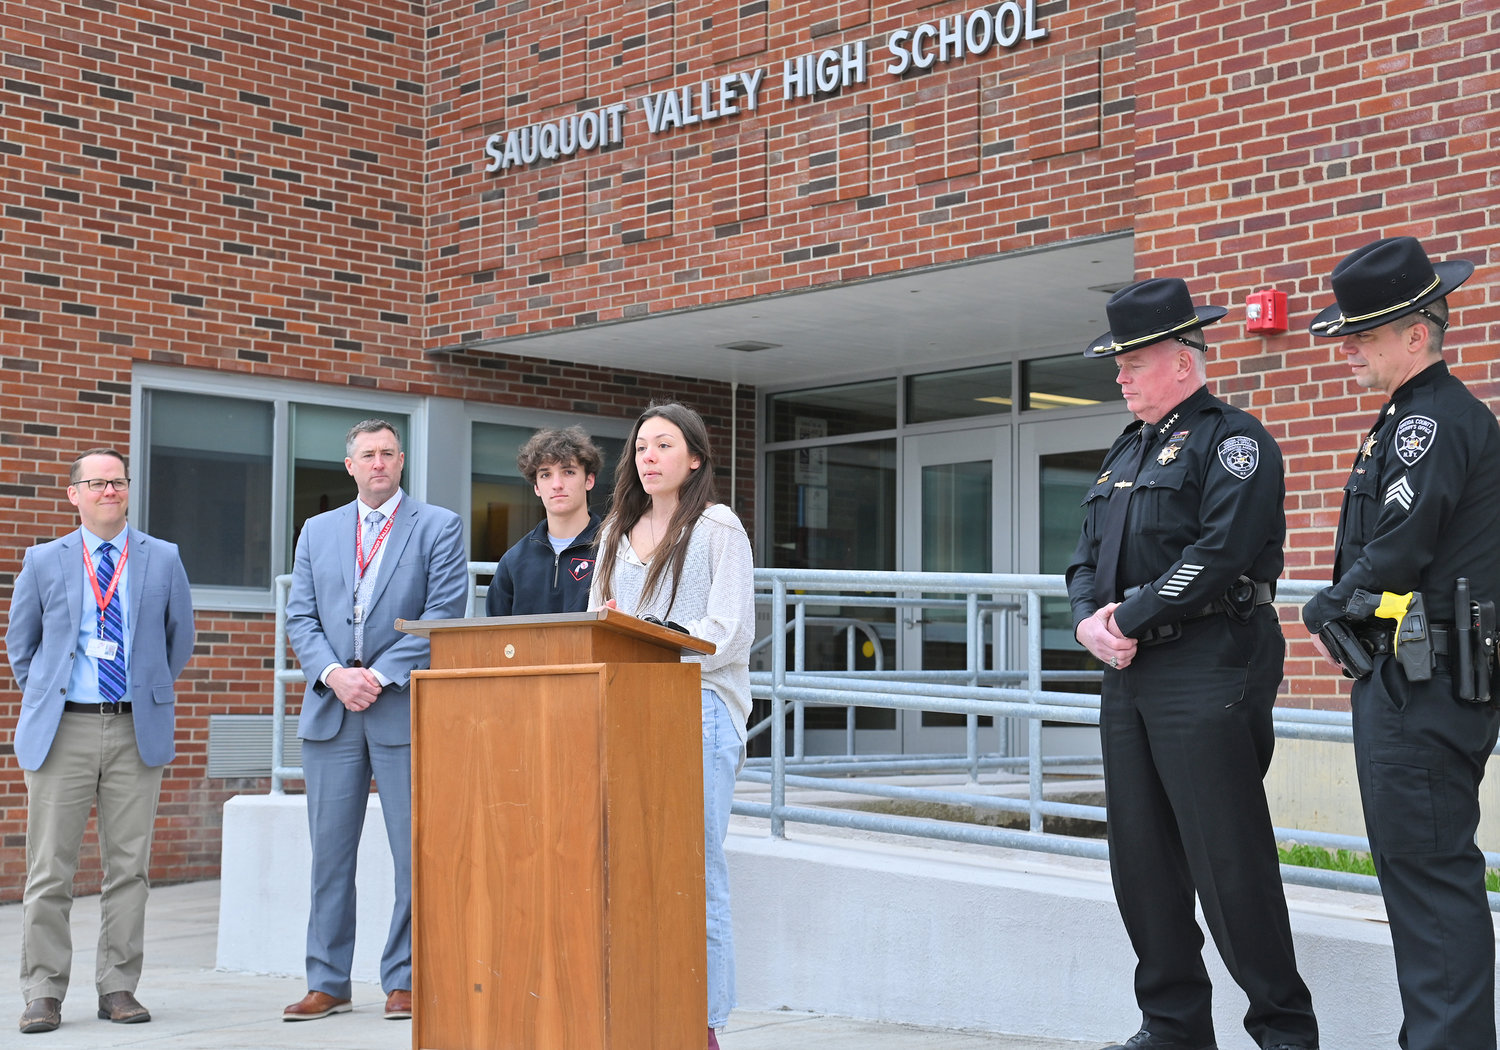 POWERFUL VOICES — Student council president Alena Weibel talks about the importance of staying safe during prom season at Sauquoit Valley High School on Friday, kicking off the No Empty Chair campaign for next week. Weibel was joined by, from left, Principal Brian Read, Superintendent Ronald Wheelock, senior class president Benjamin LoGalbo, Oneida County Sheriff Robert M. Maciol, and Sgt. Carey Phair.